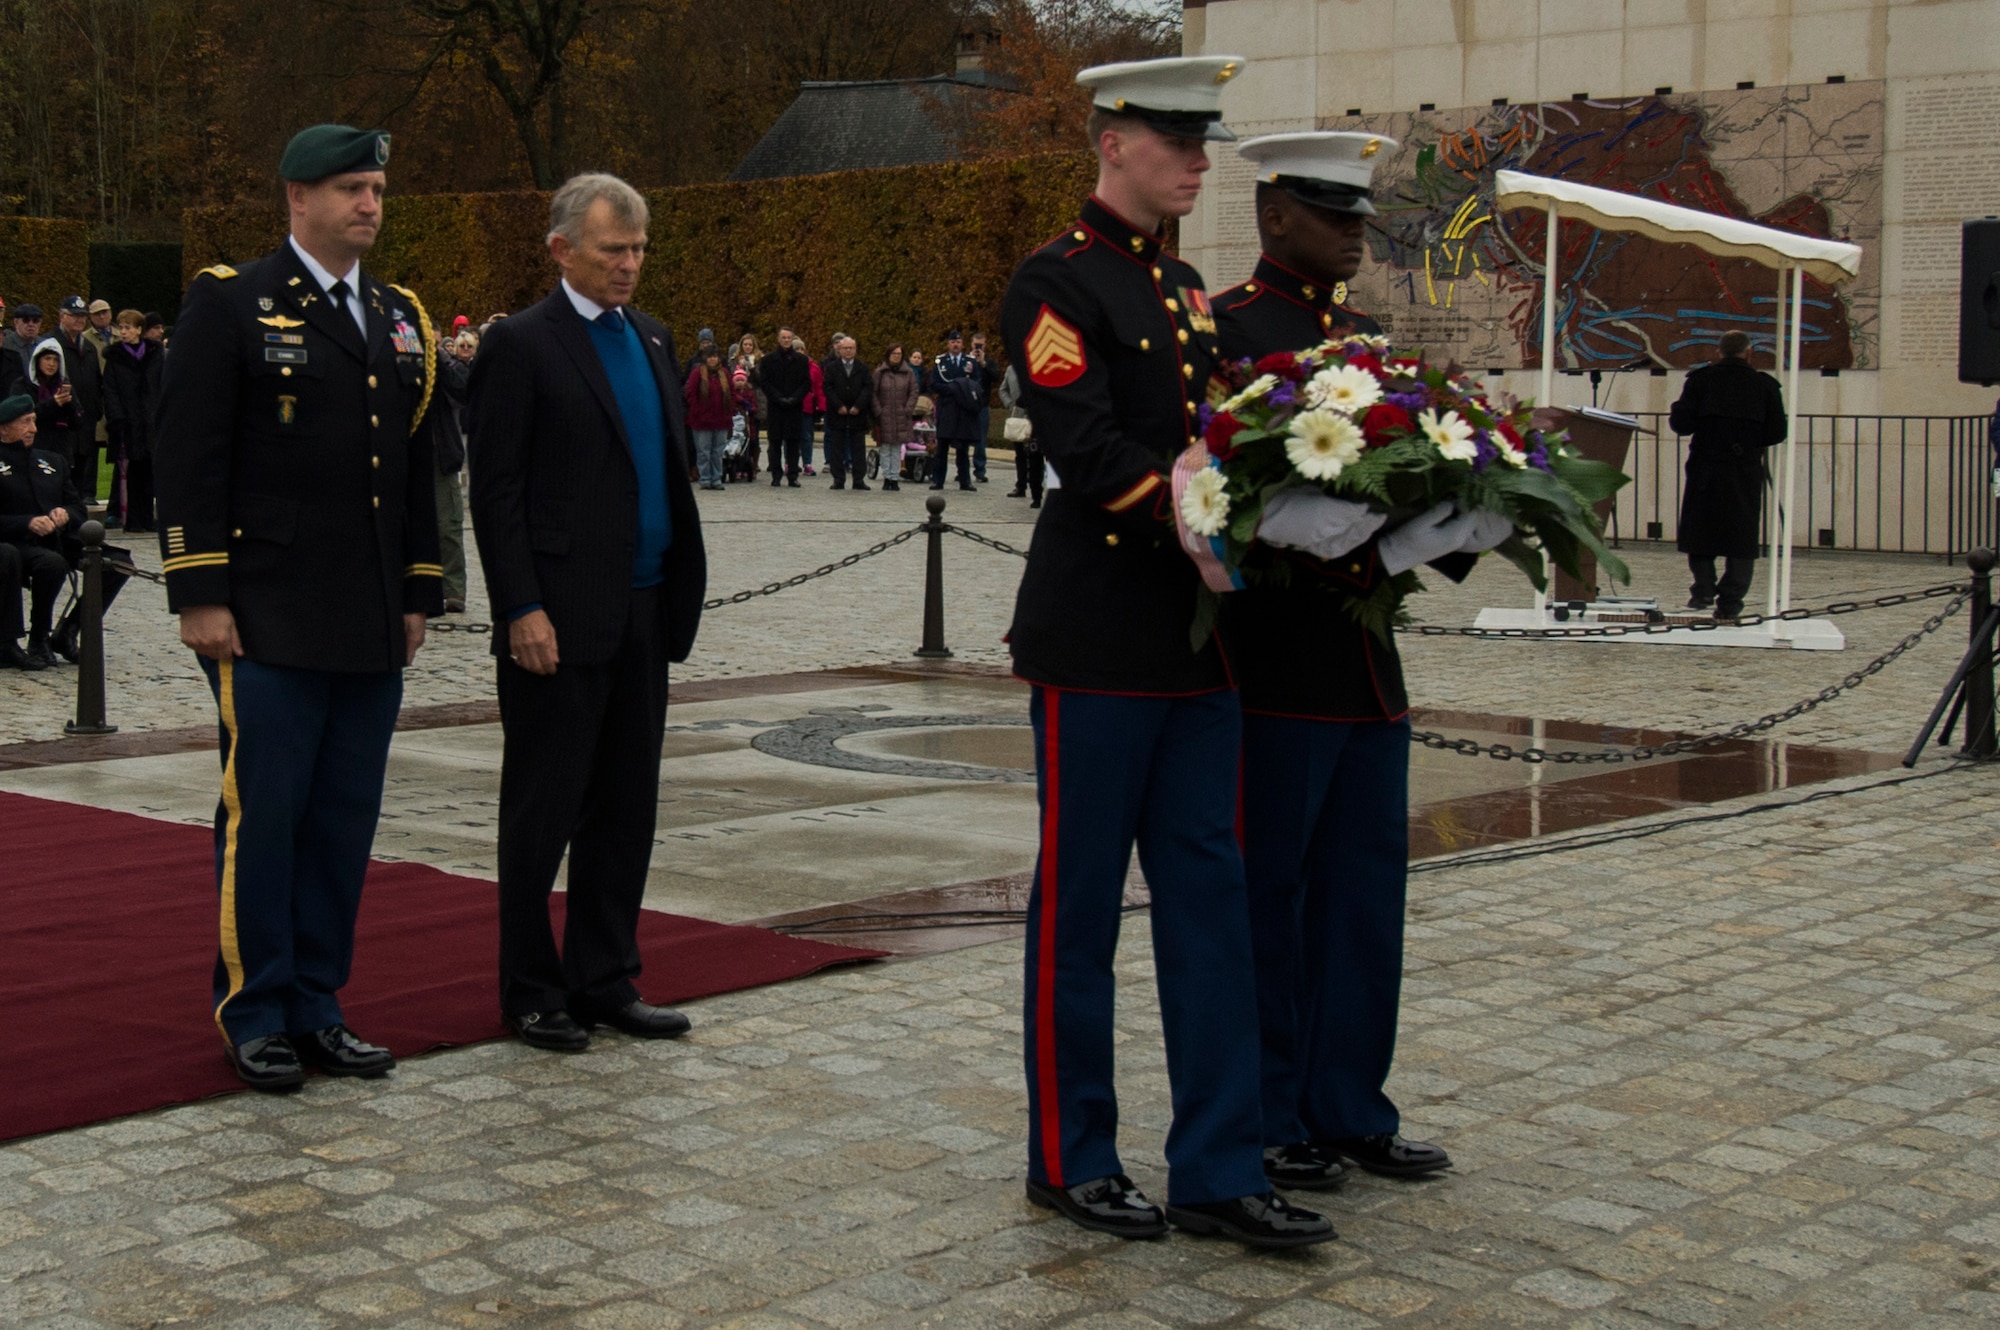 David McKean, U.S. Ambassador to the Grand Duchy of Luxembourg, center right, waits with a detail of American service members before presenting a wreath during a Memorial Day ceremony at the Luxembourg American Military Cemetery and Memorial in Luxembourg, Nov. 11, 2016. The ceremony paid tribute to the legacy of service of members of the American armed forces. (U.S. Air Force photo by Staff Sgt. Joe W. McFadden)